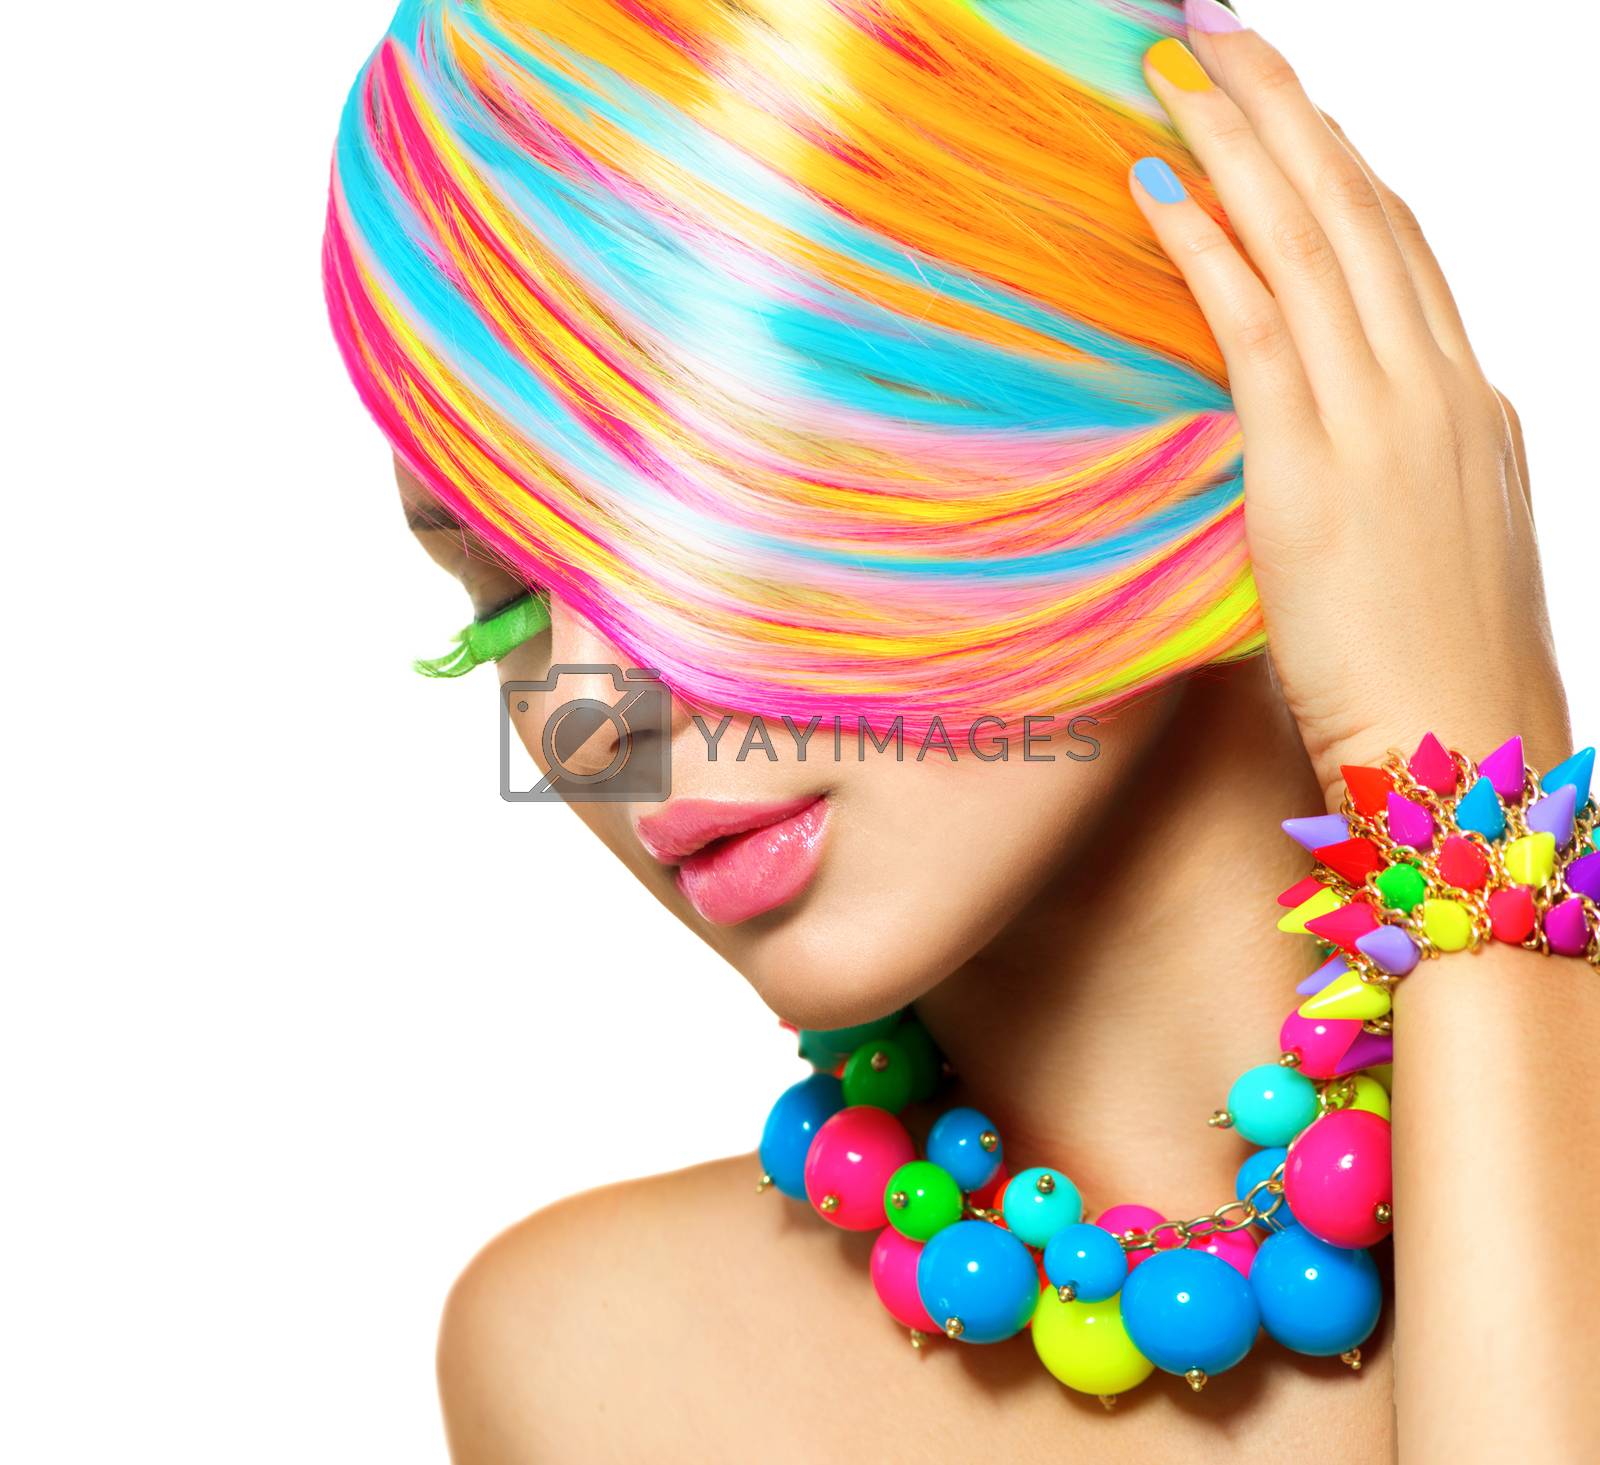 Royalty free image of Beauty Girl Portrait with Colorful Makeup, Hair and Accessories by SubbotinaA